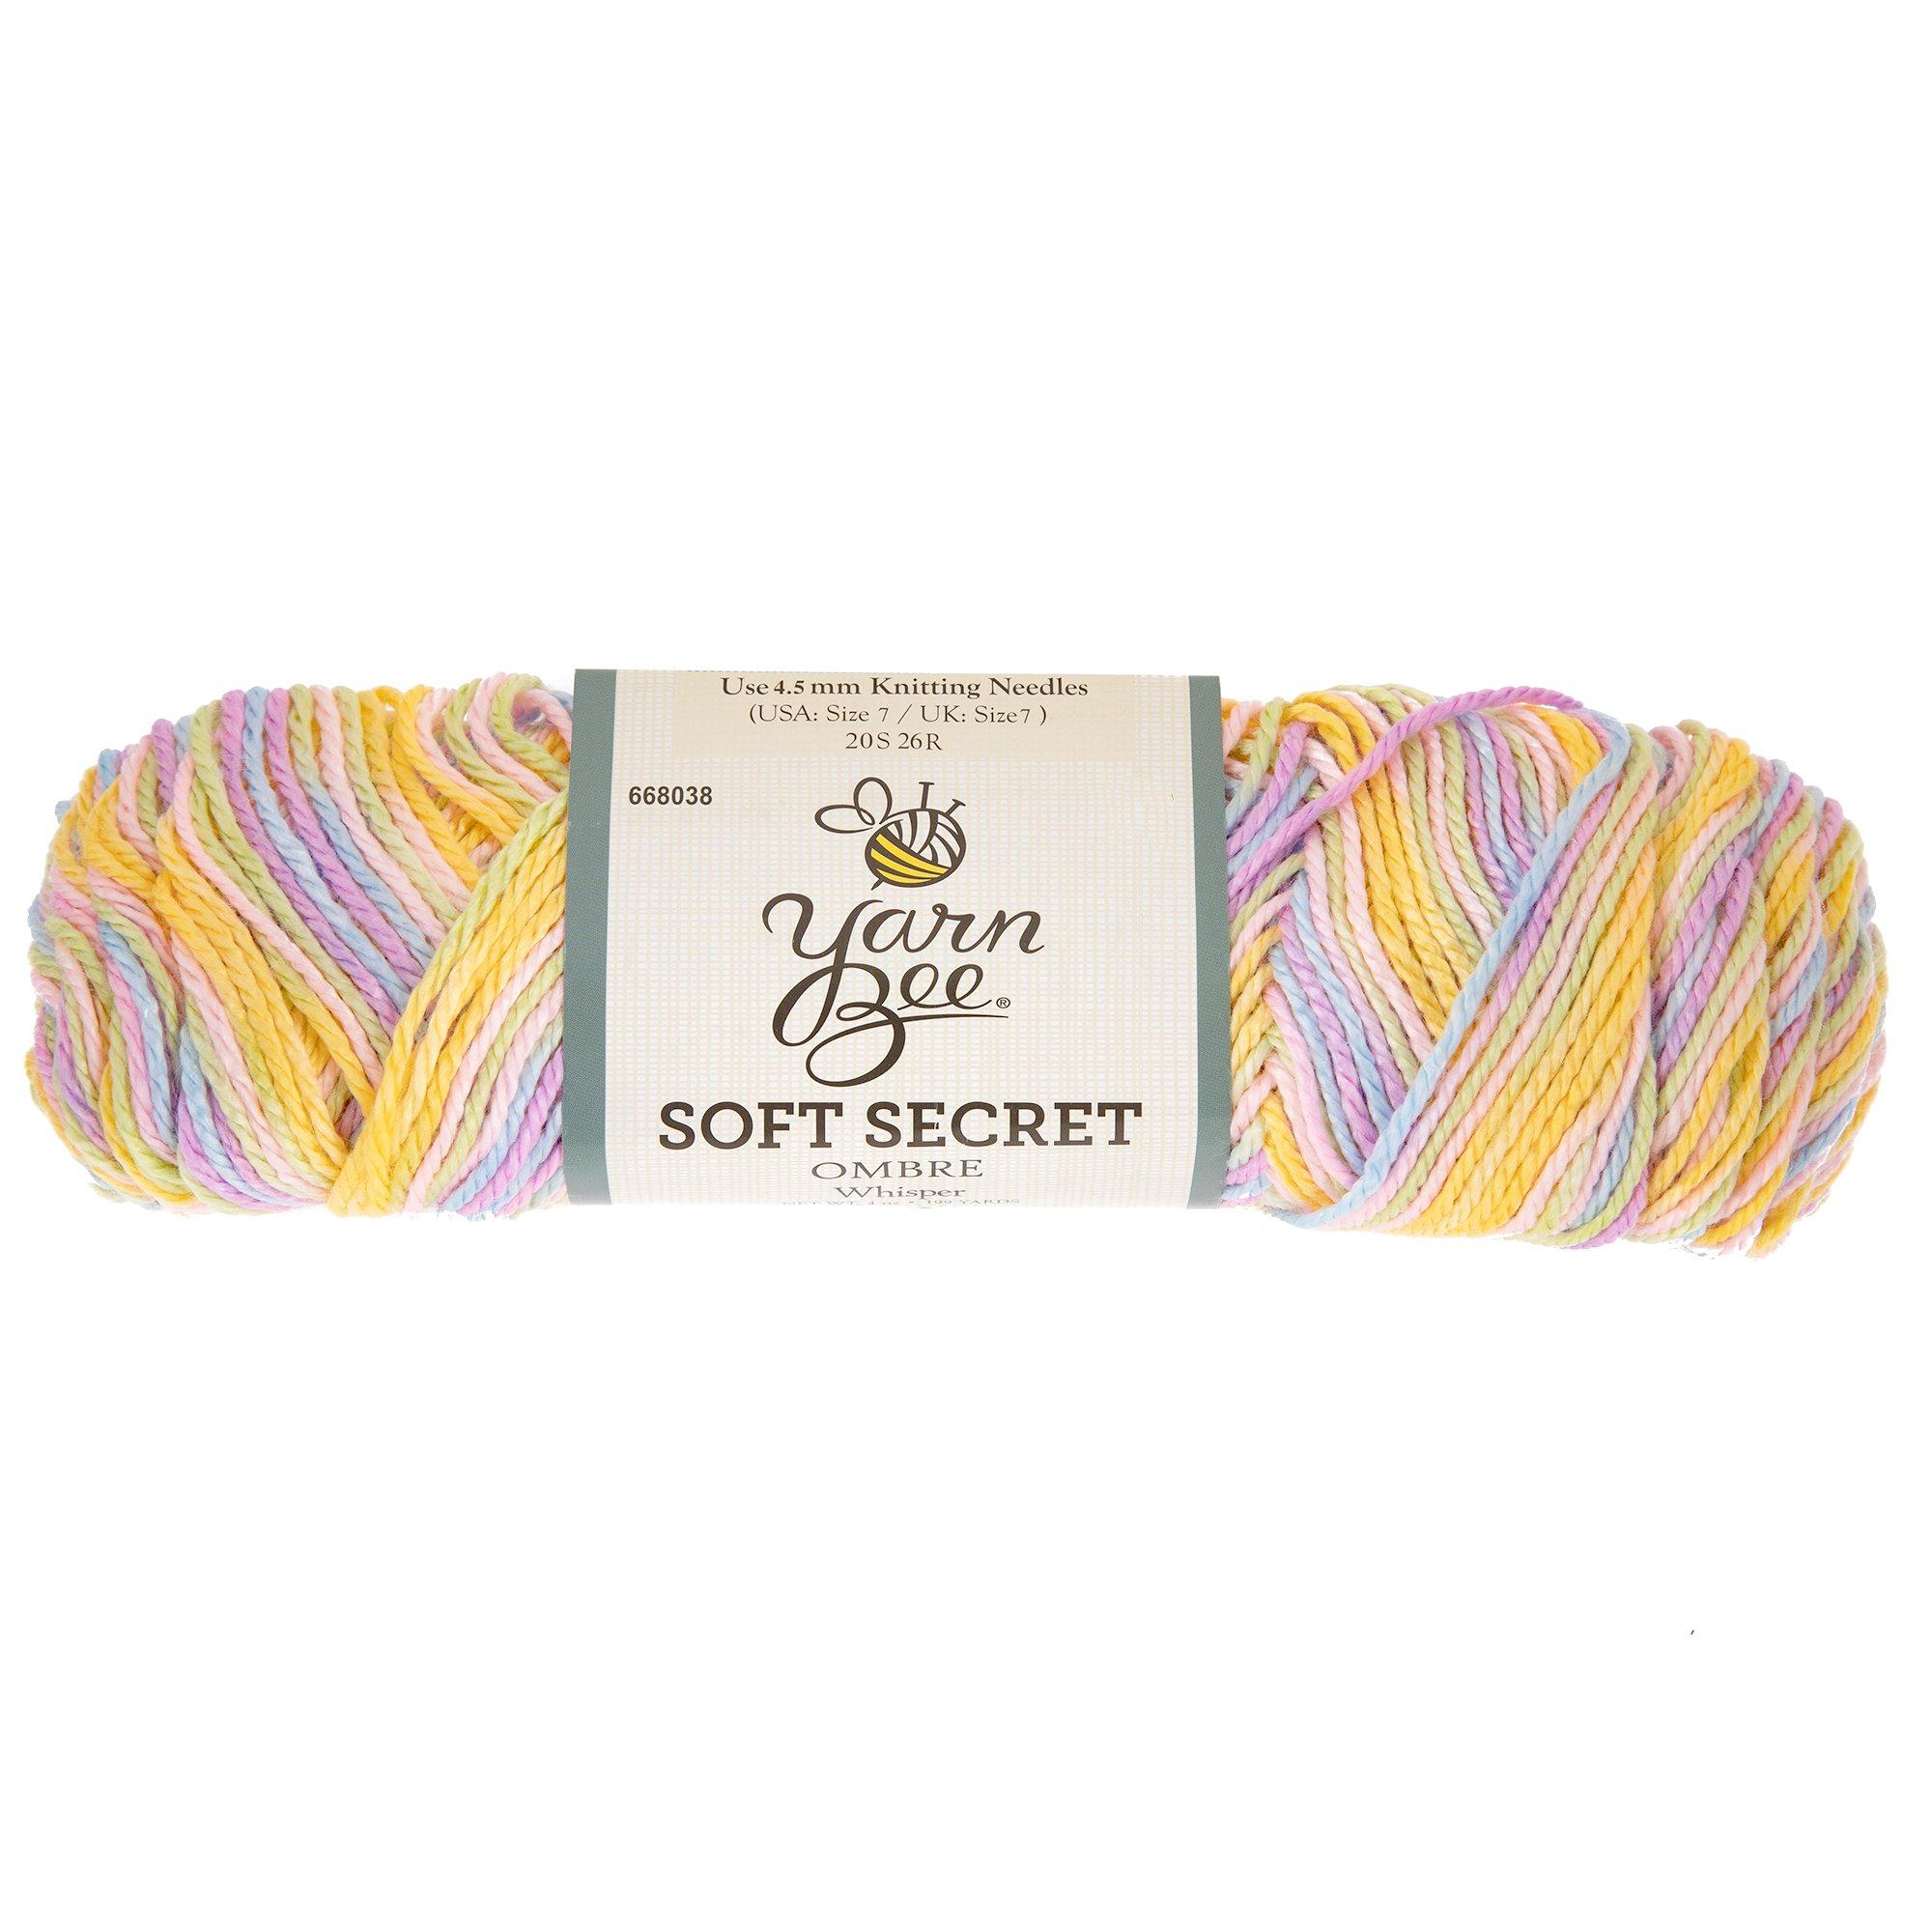 Mena's Review On Yarn Bee Soft And Sleek By Hobby Lobby 